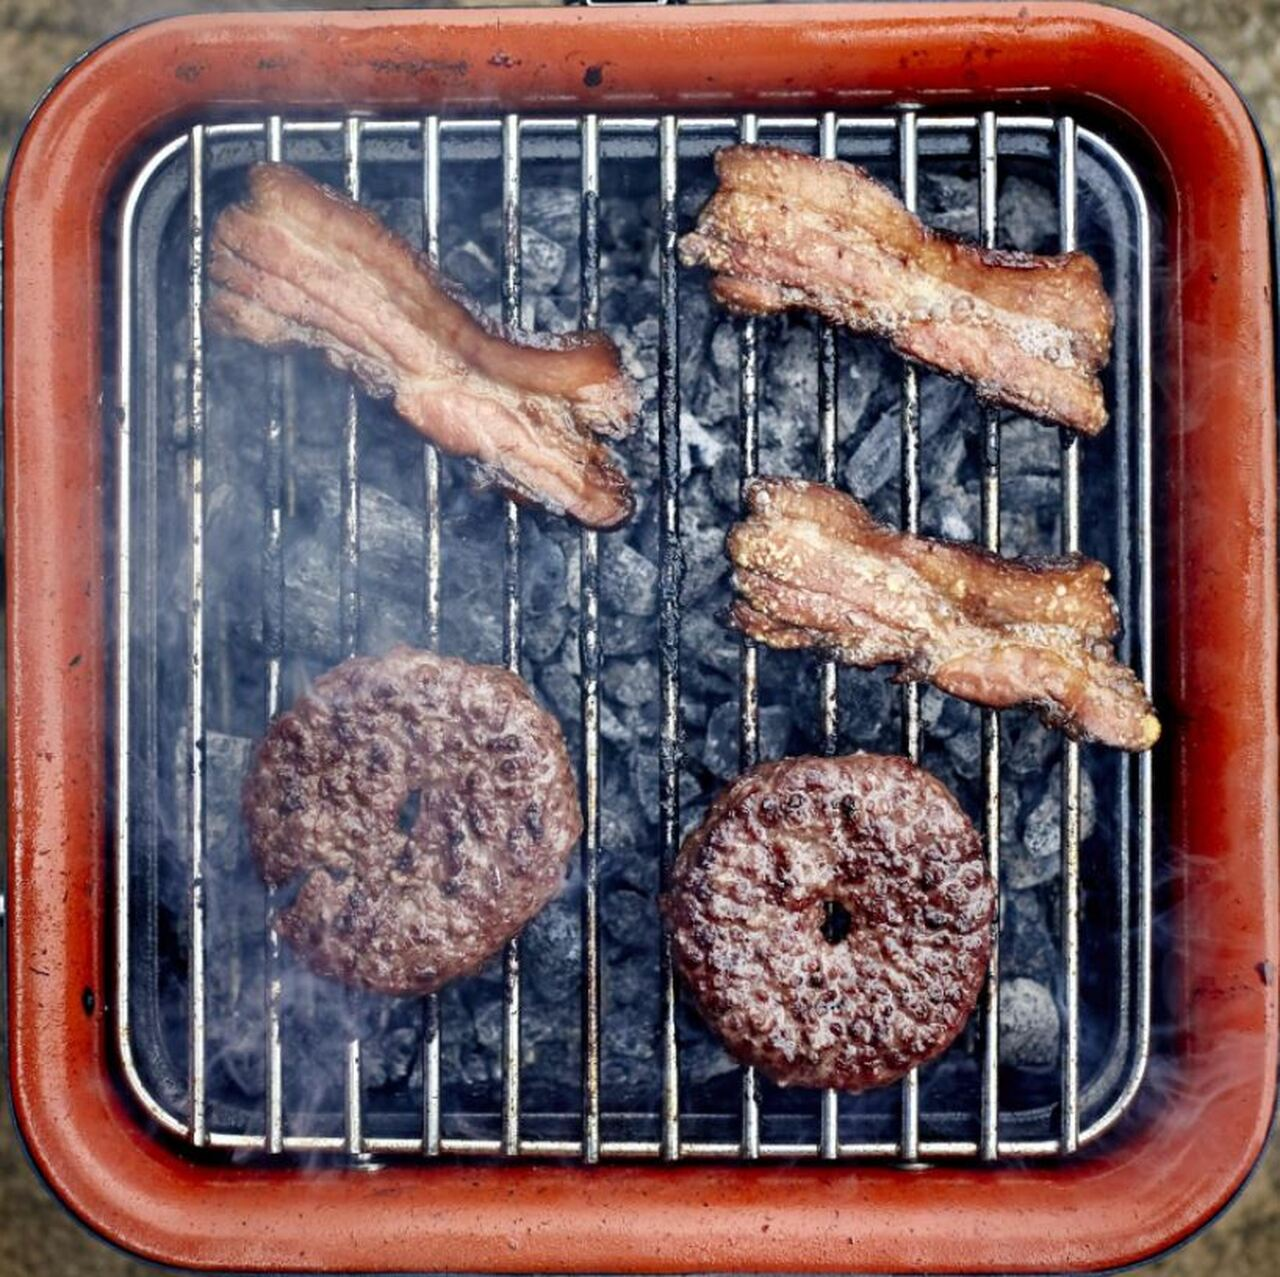 Portable charcoal BBQ grill gift for Dad